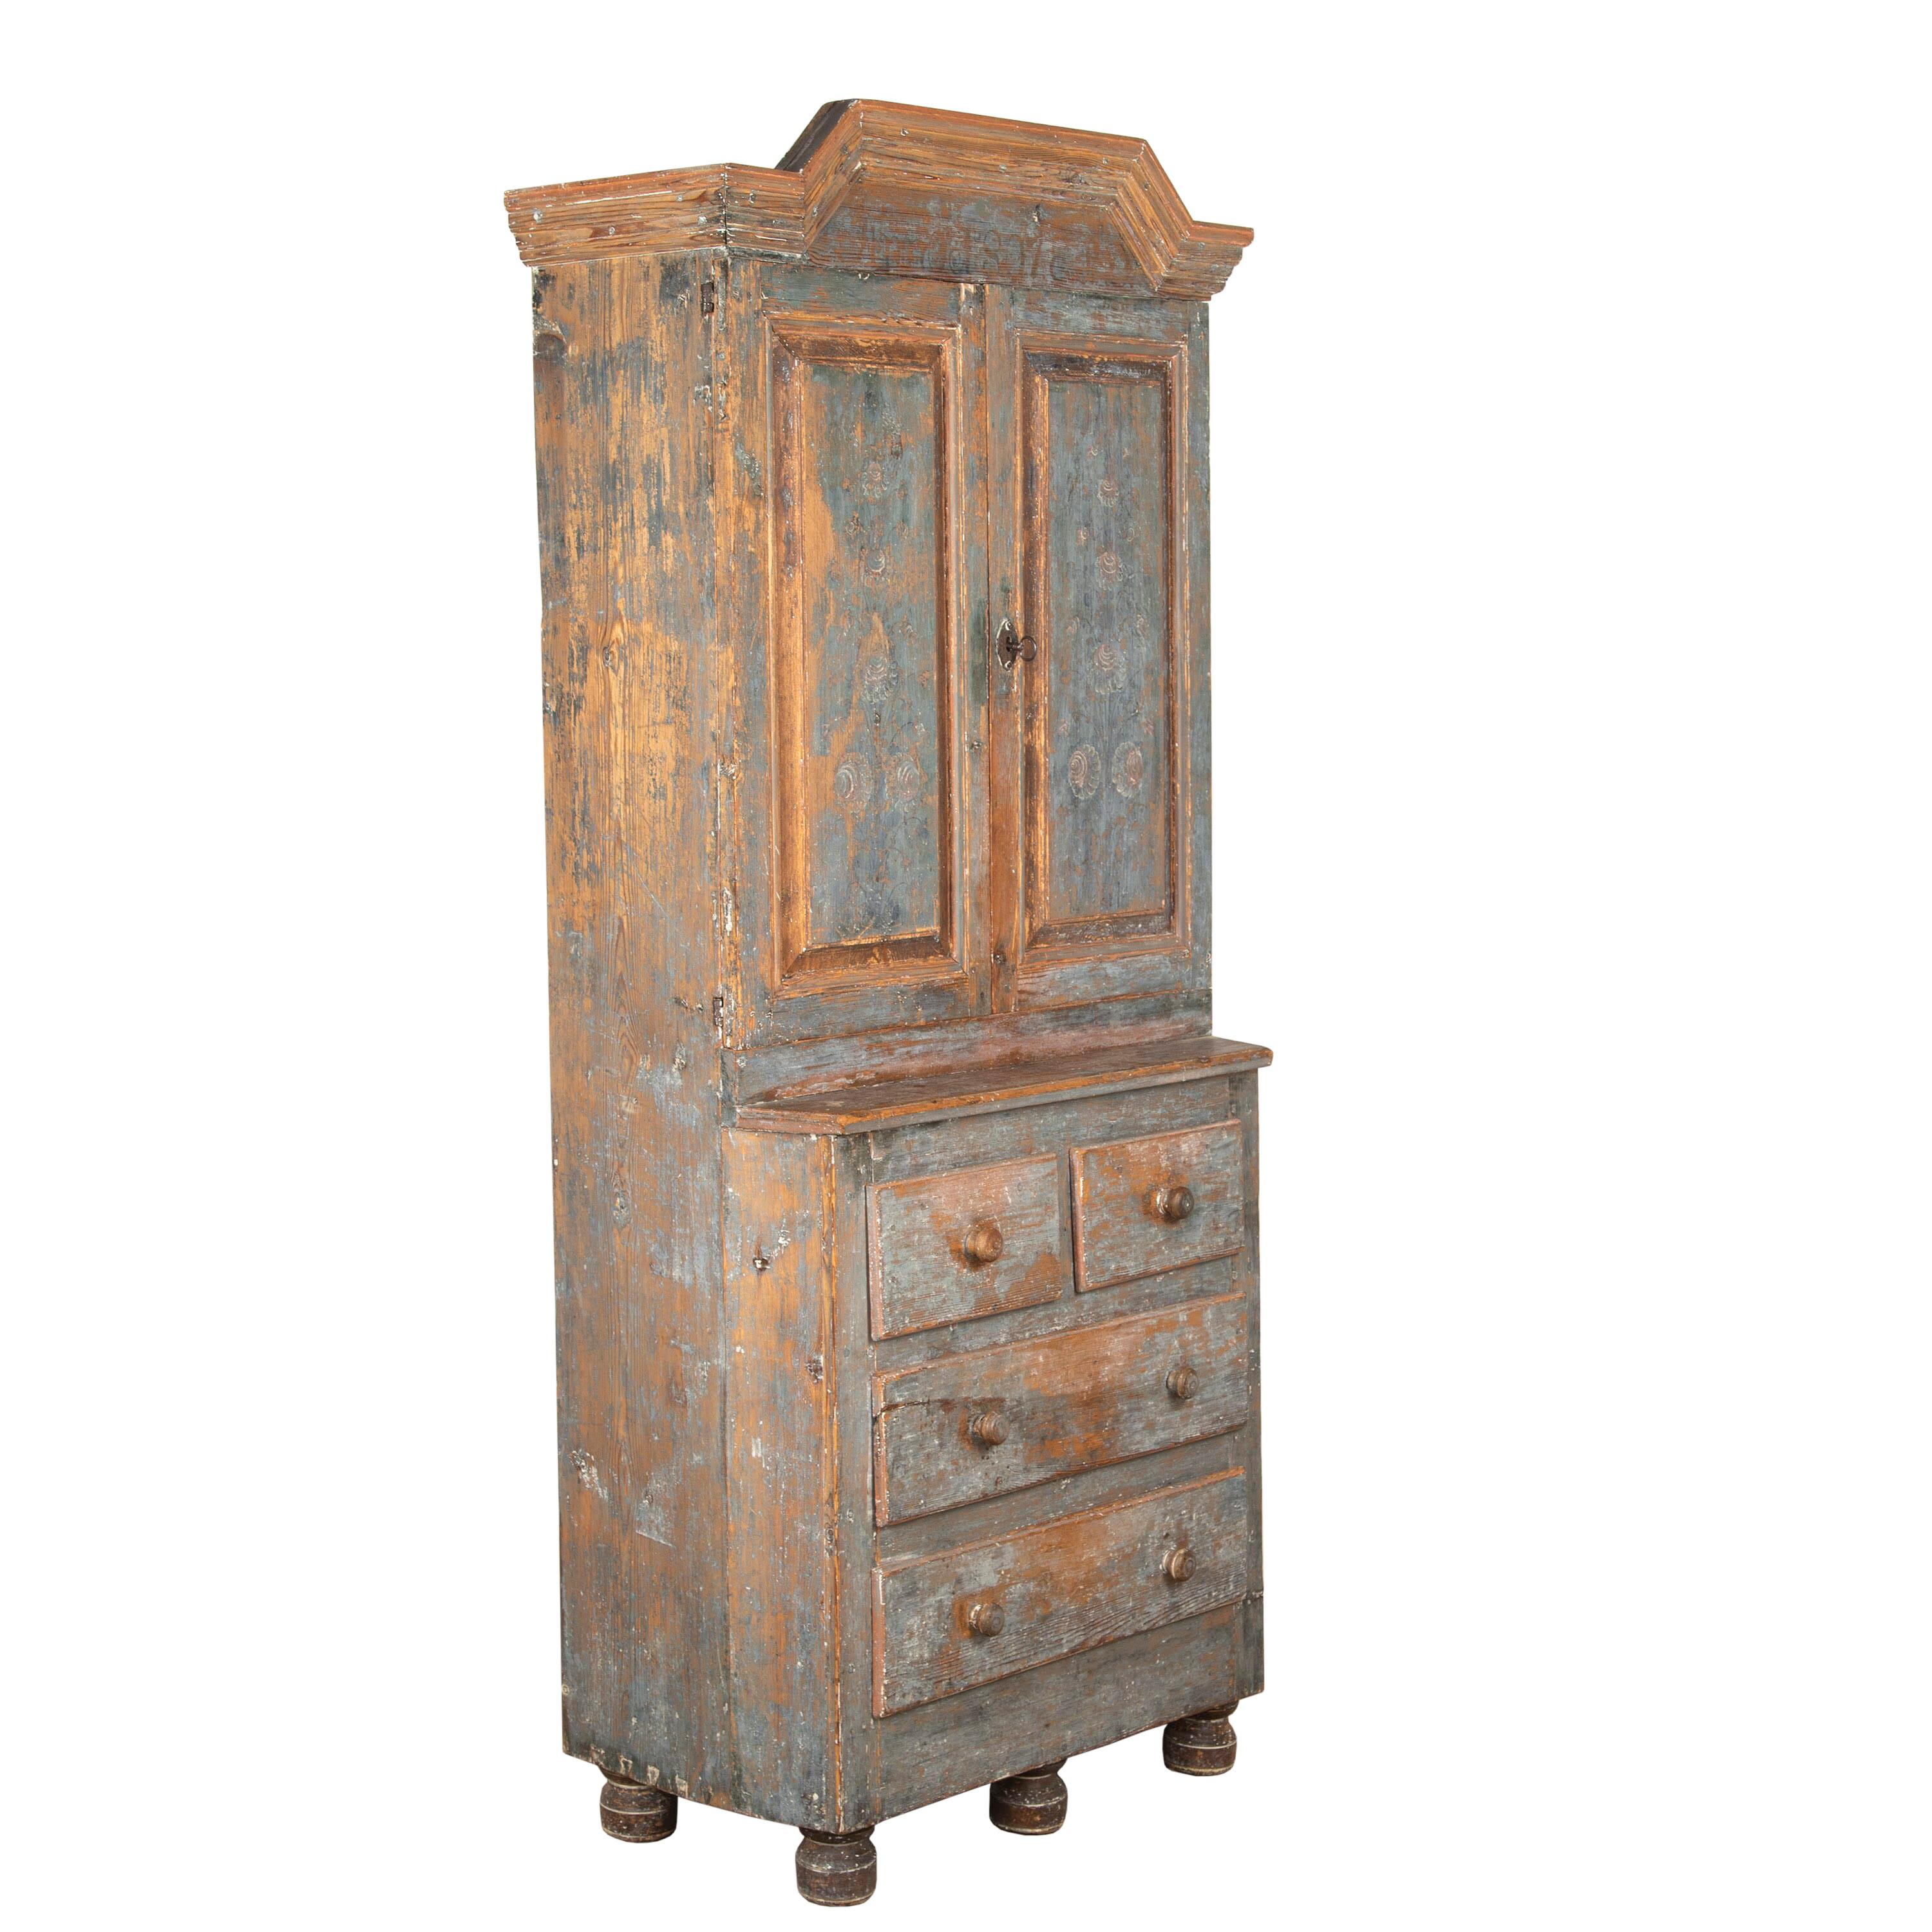 Exceptional Swedish 18th Century cabinet in its untouched and original paintwork.
This superb piece features a wonderfully carved pediment that sits above two beautiful doors that are etched with floral details throughout. The two doors open to